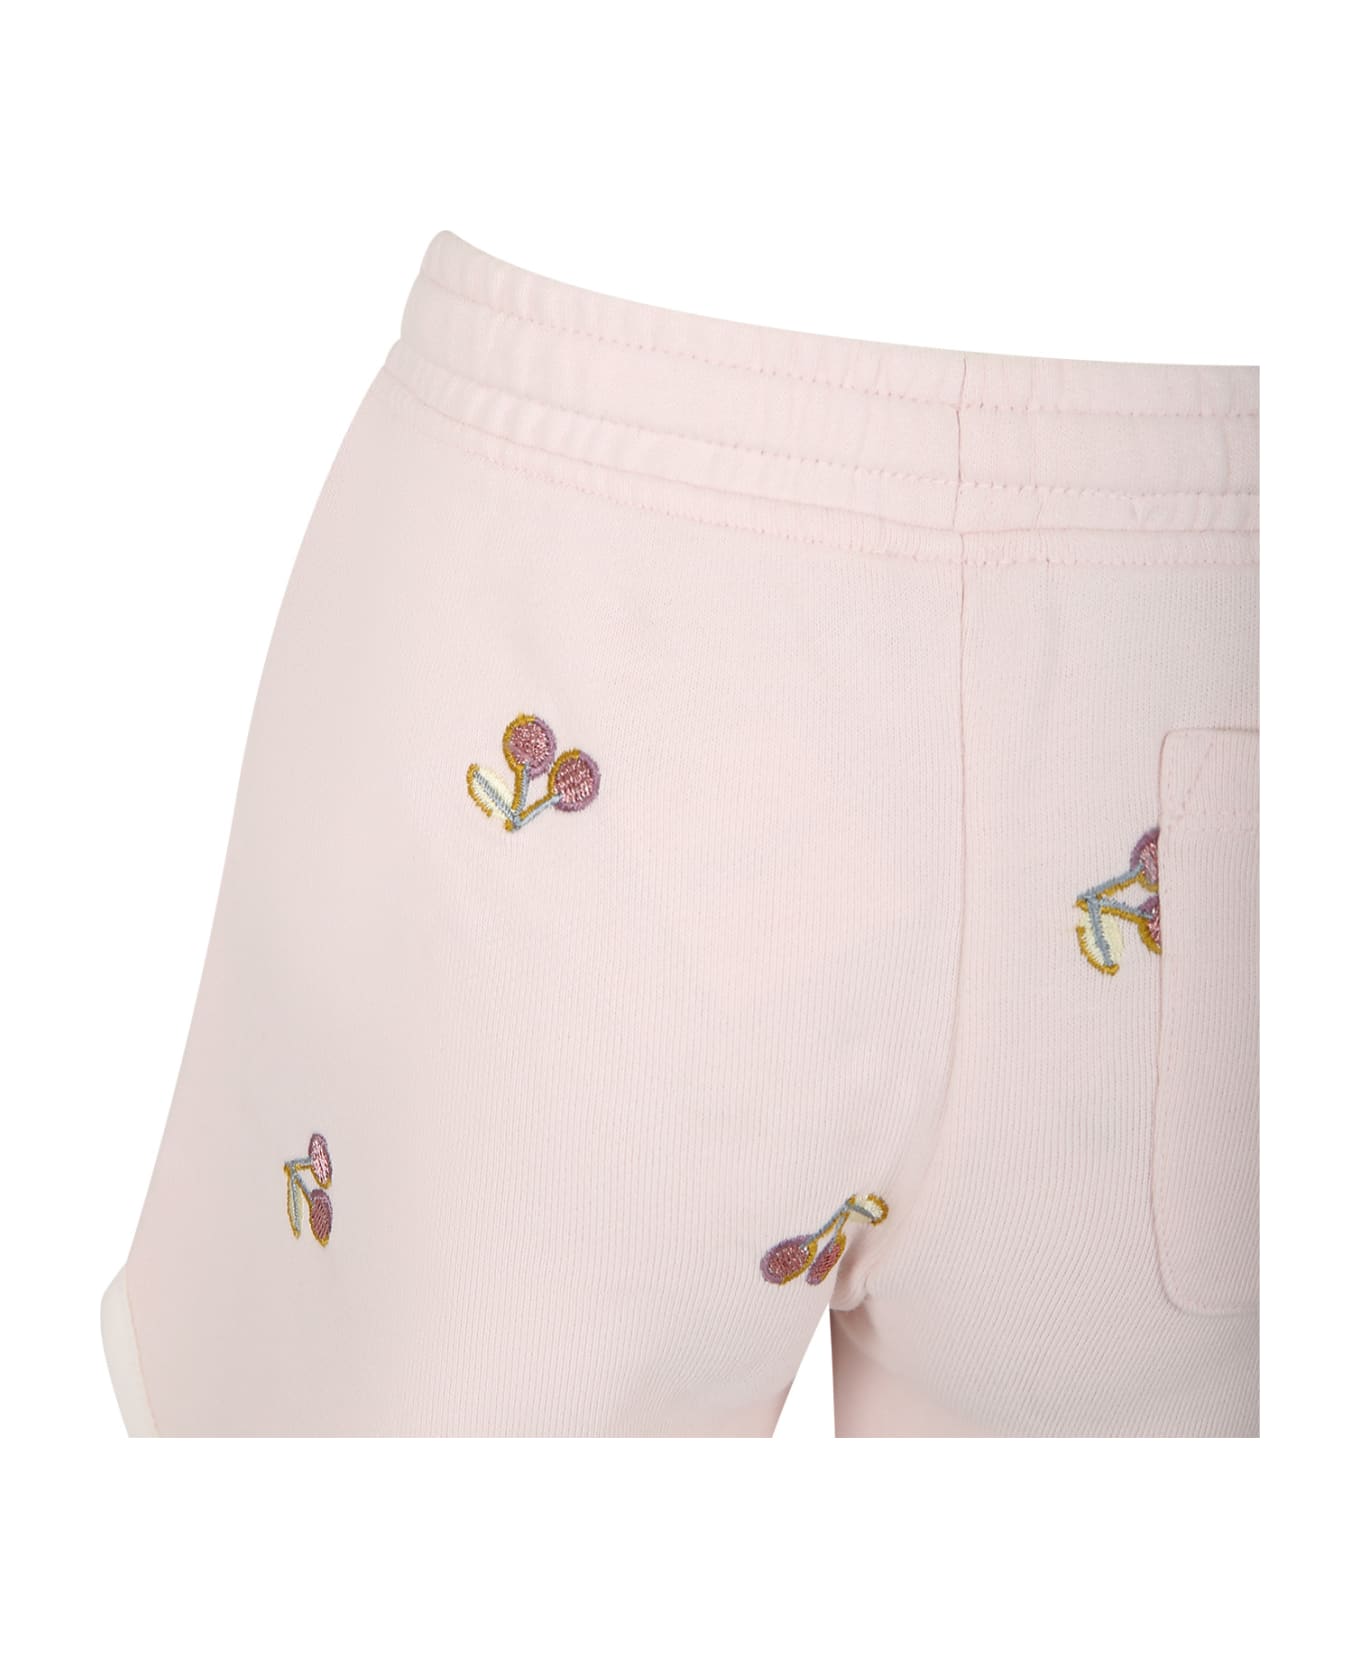 Bonpoint Pink Shorts For Girl With Cherries - Pink ボトムス